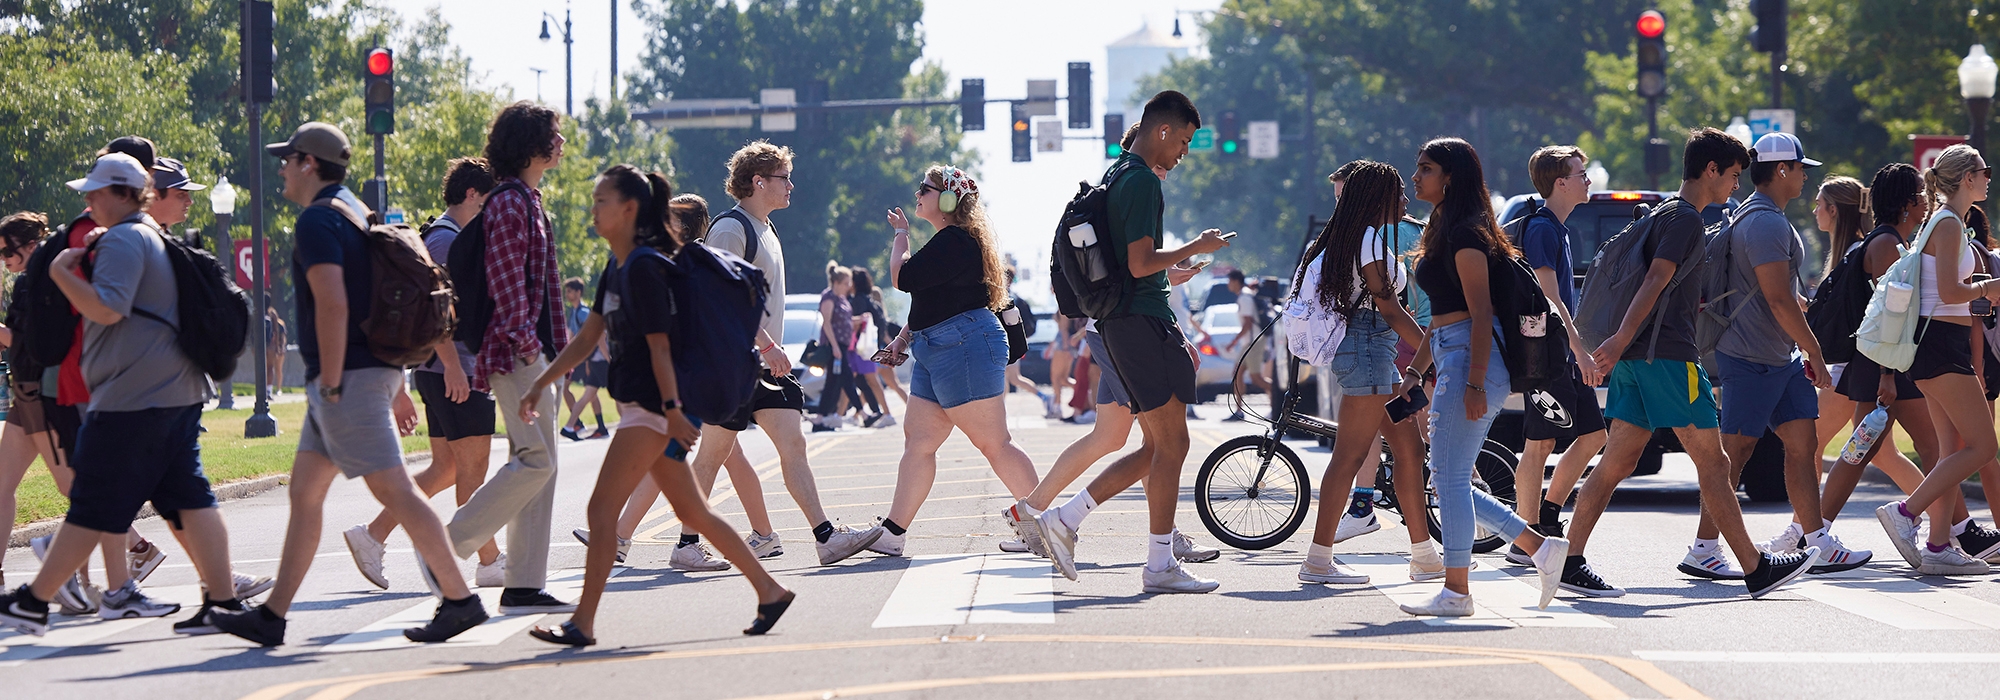 Students walking in crosswalk on campus at the University of Oklahoma.